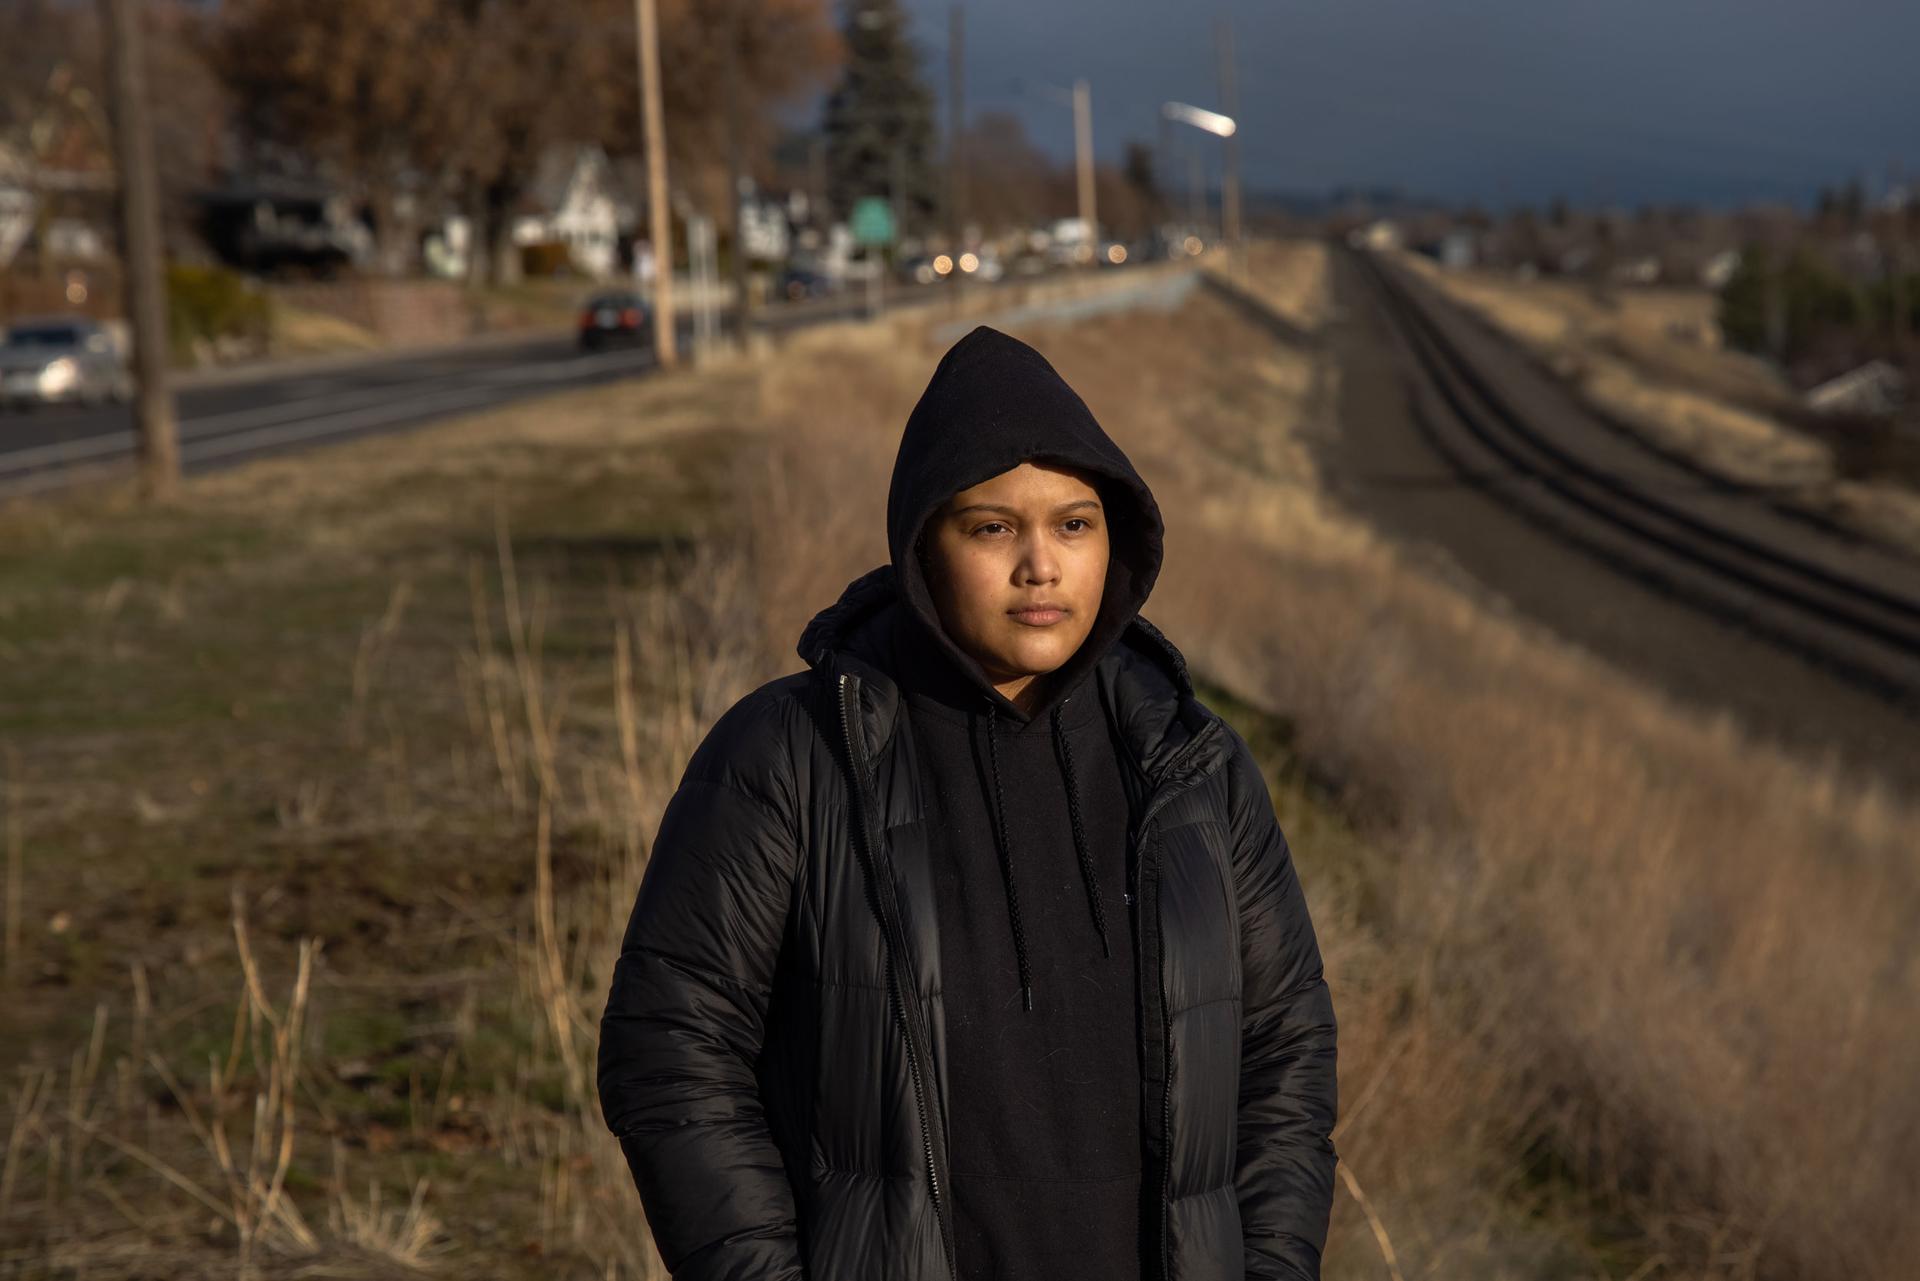 A woman is shown wearing a dark hooded sweatshirt and jacket while standing near a set of railroad tracks.